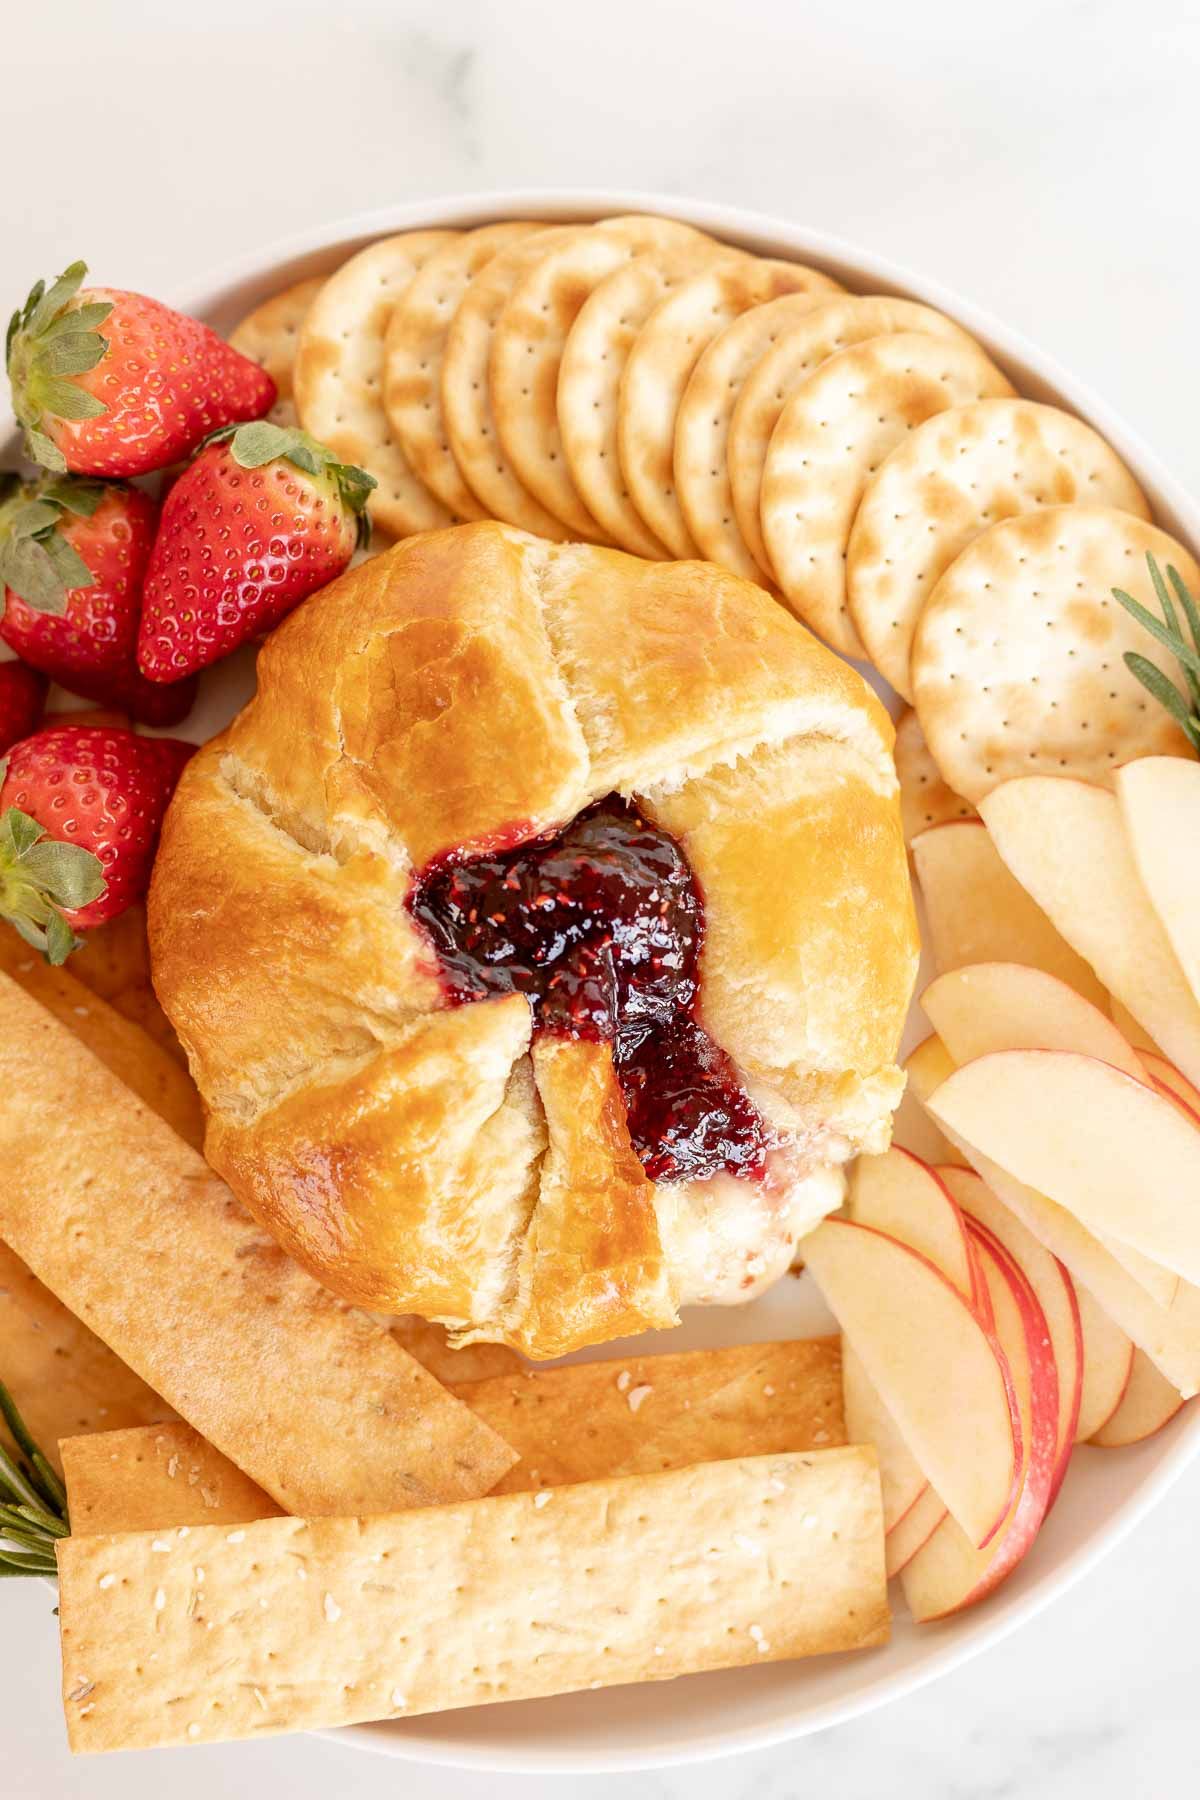 baked brie in puff pastry surrounded by fruit and crackers